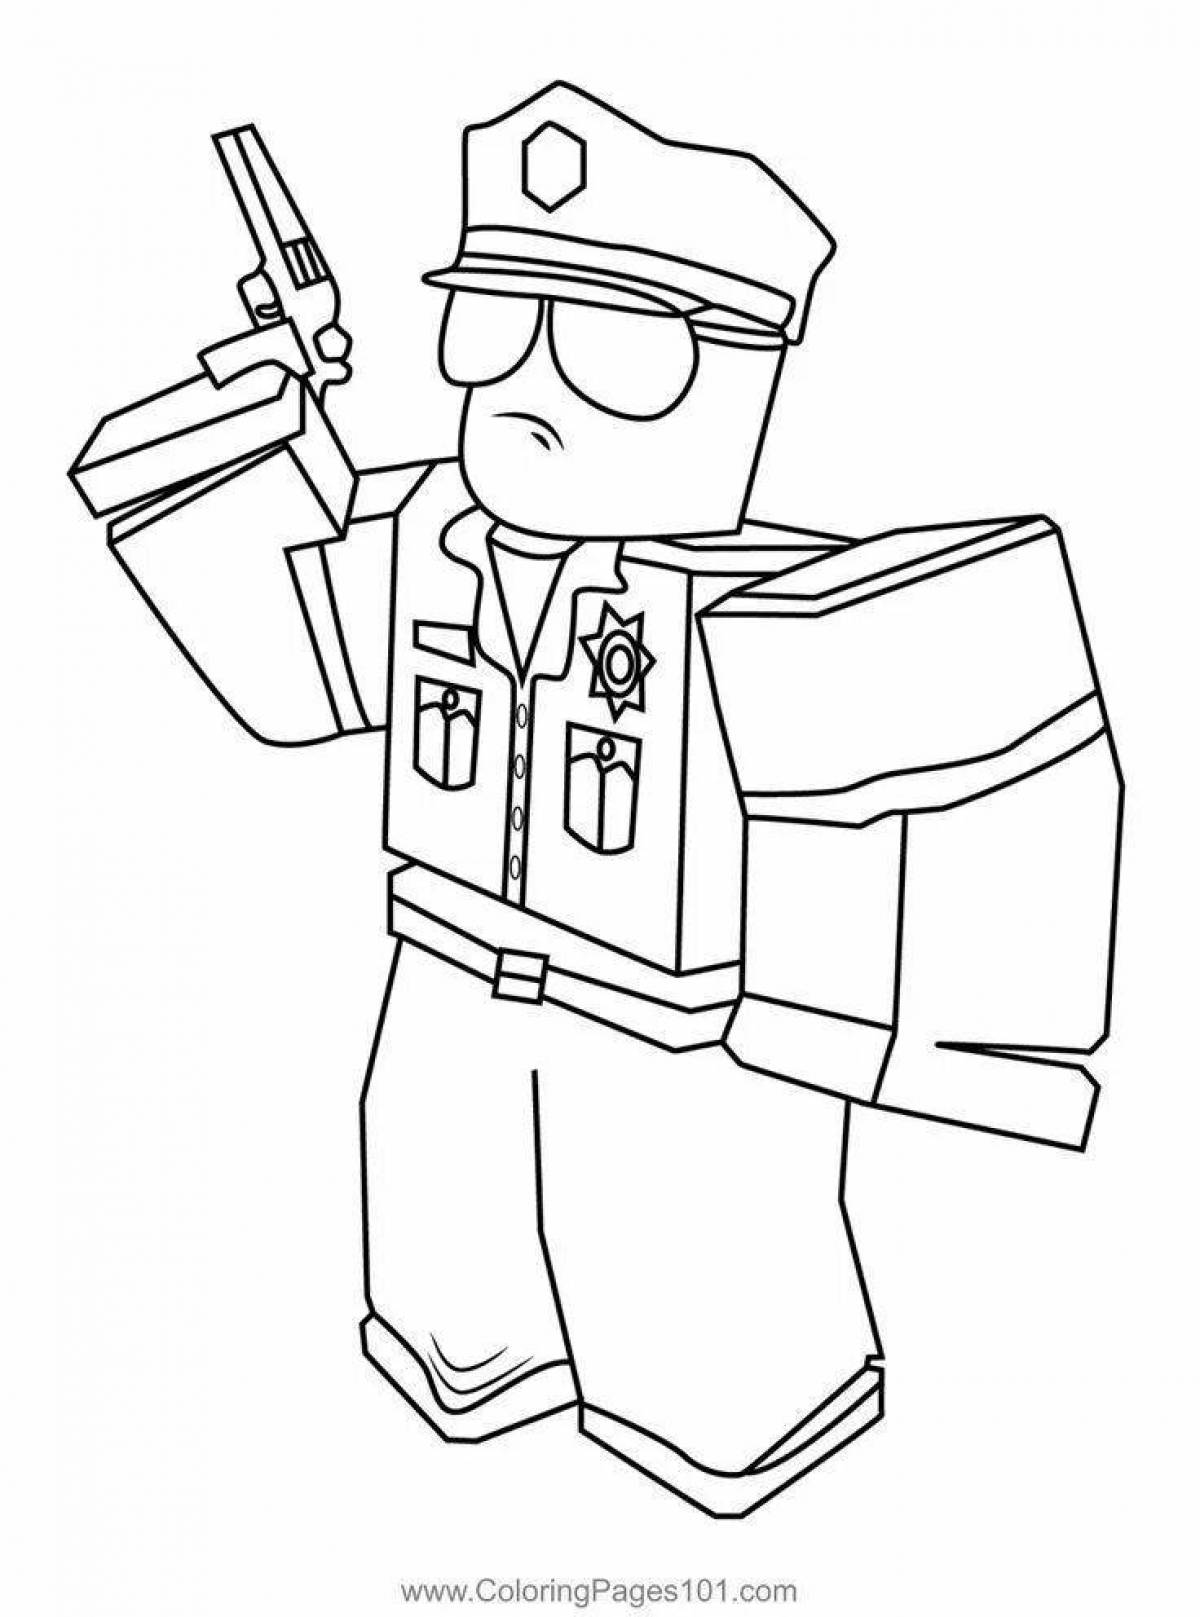 Dazzling roblox face coloring page